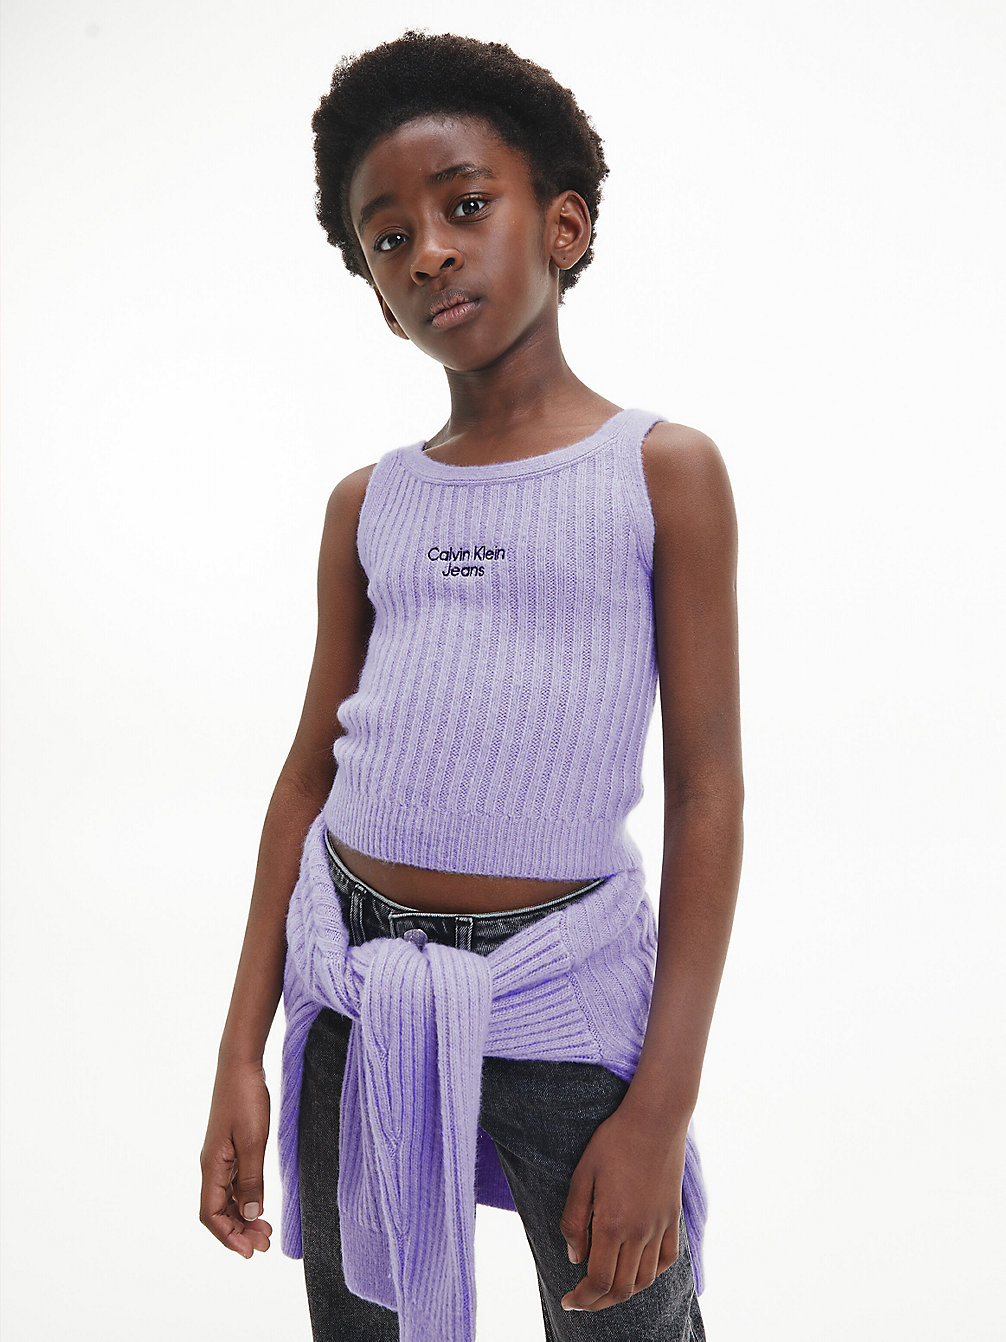 LAVENDER ICE Ribbed Knit Top undefined girls Calvin Klein